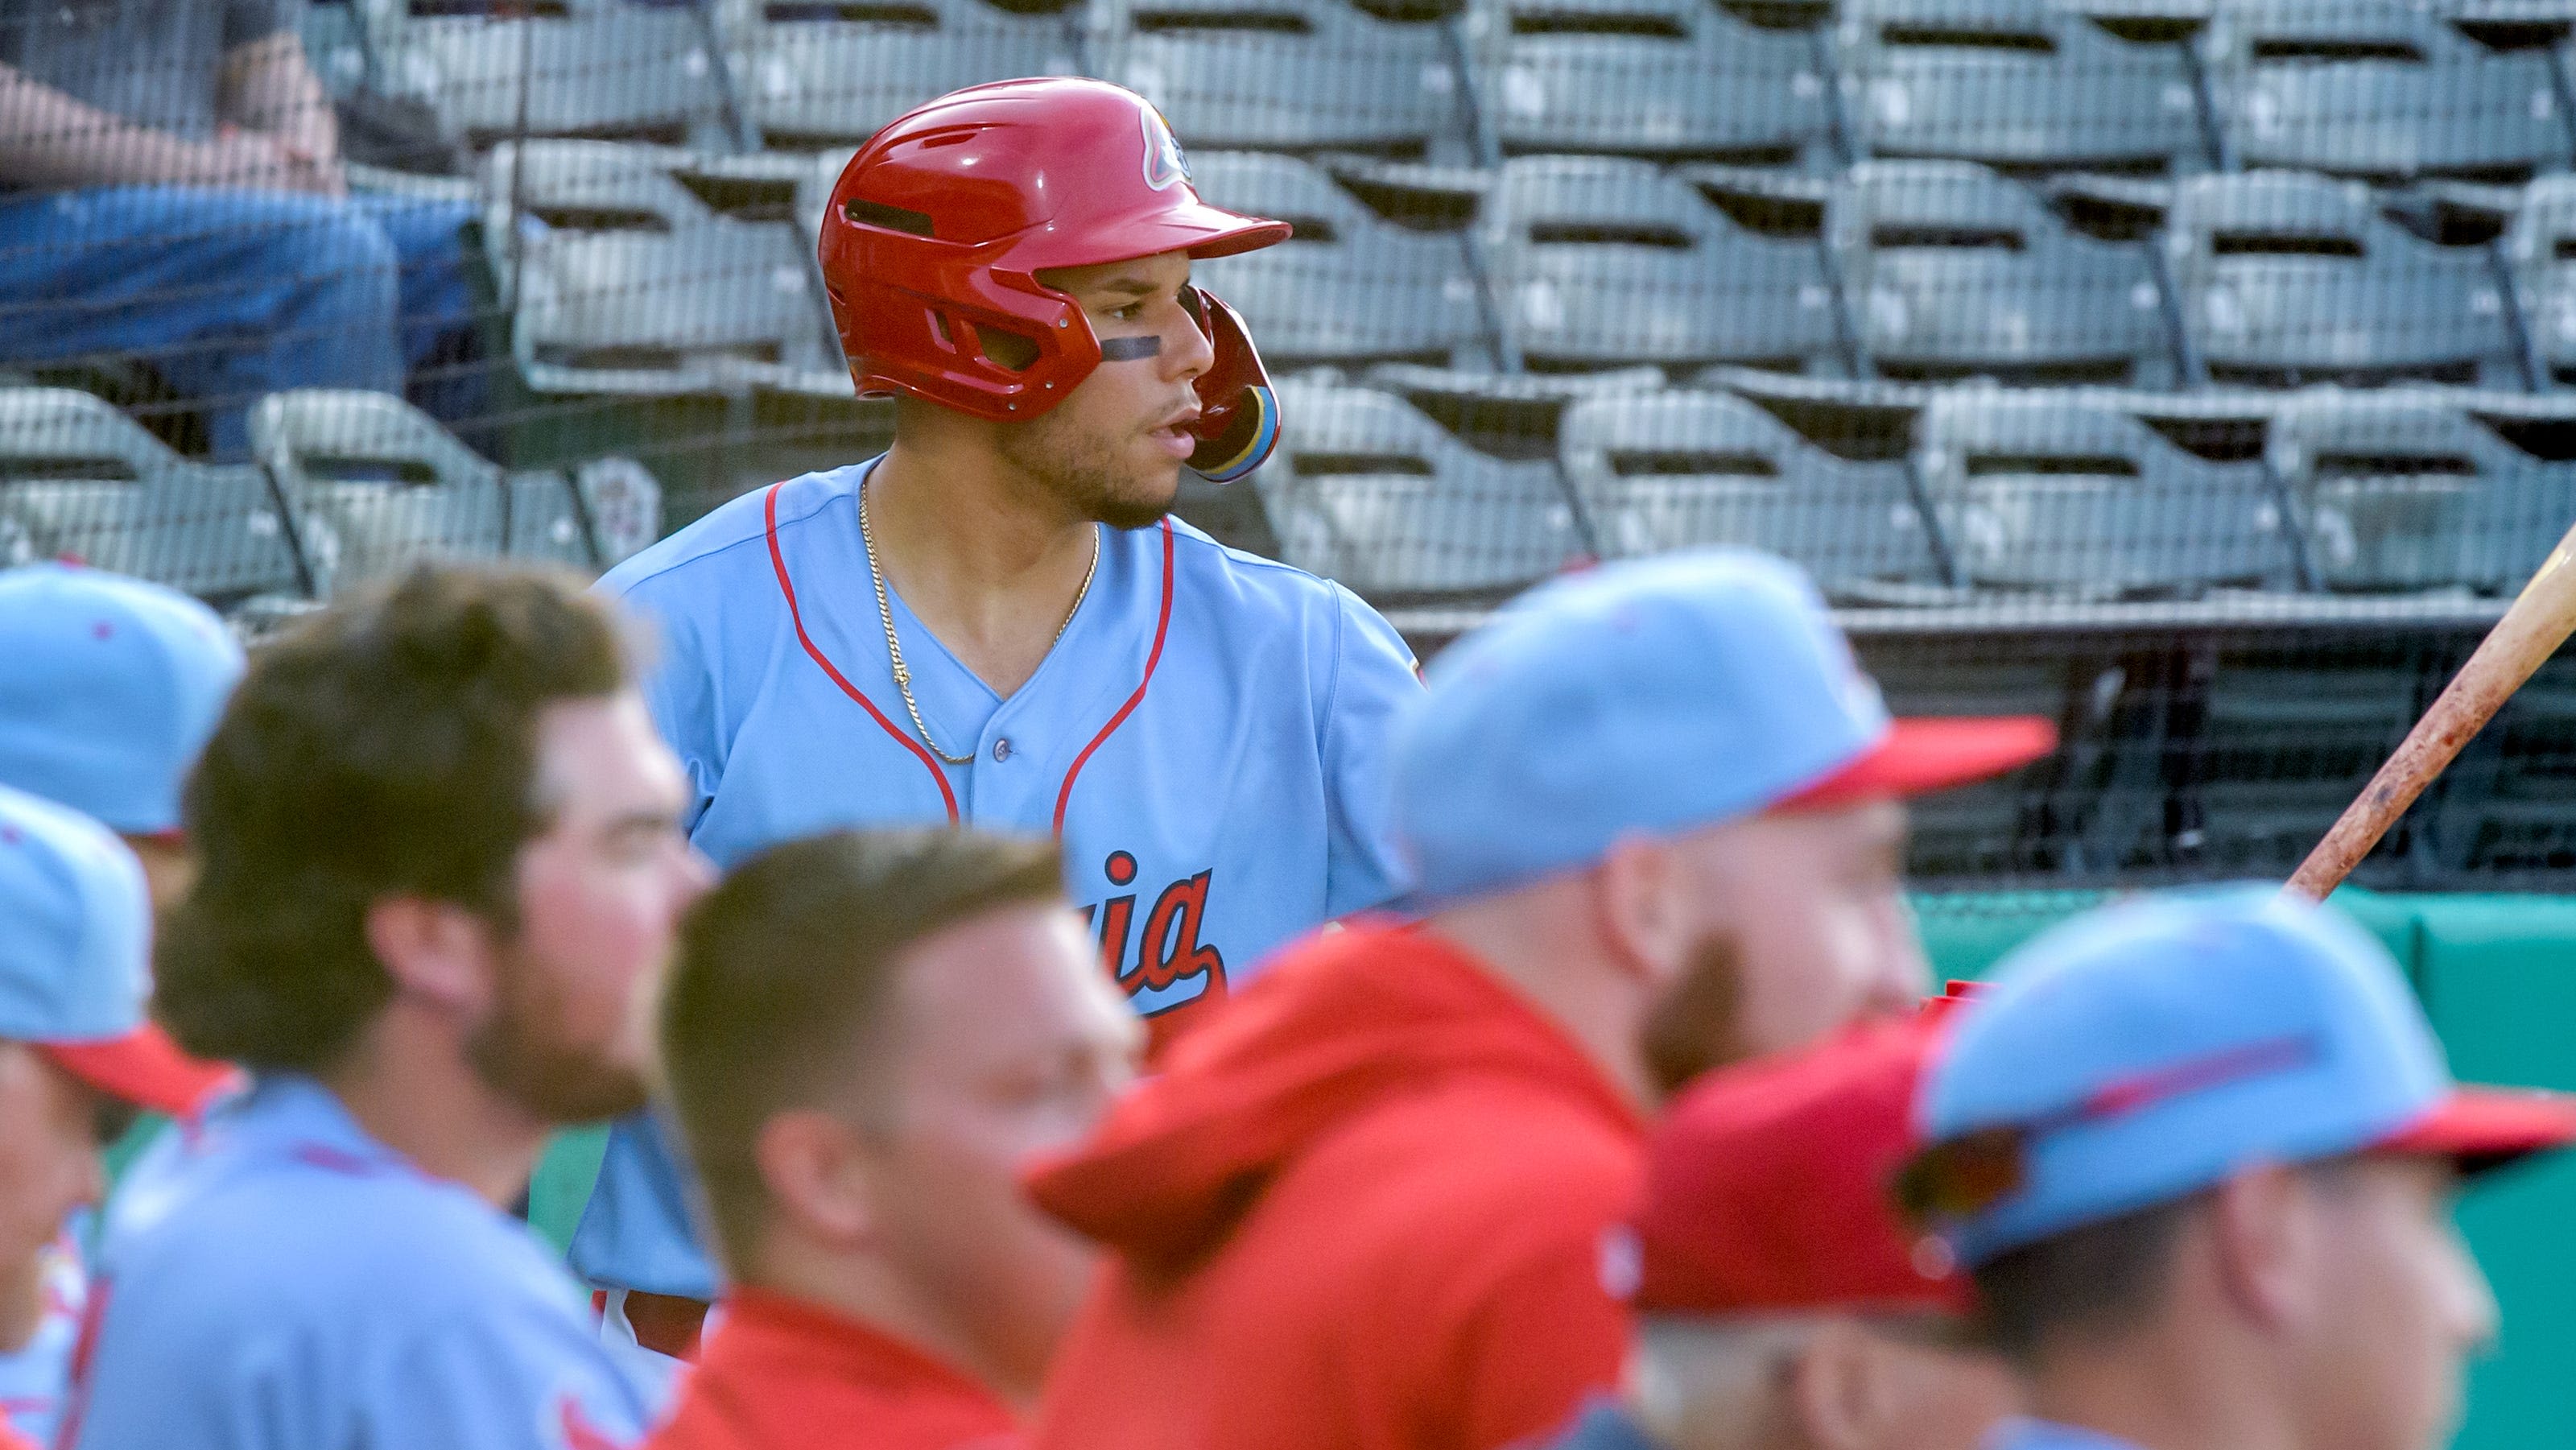 This humble St. Louis Cardinals elite prospect brings power, MLB dreams to Peoria Chiefs